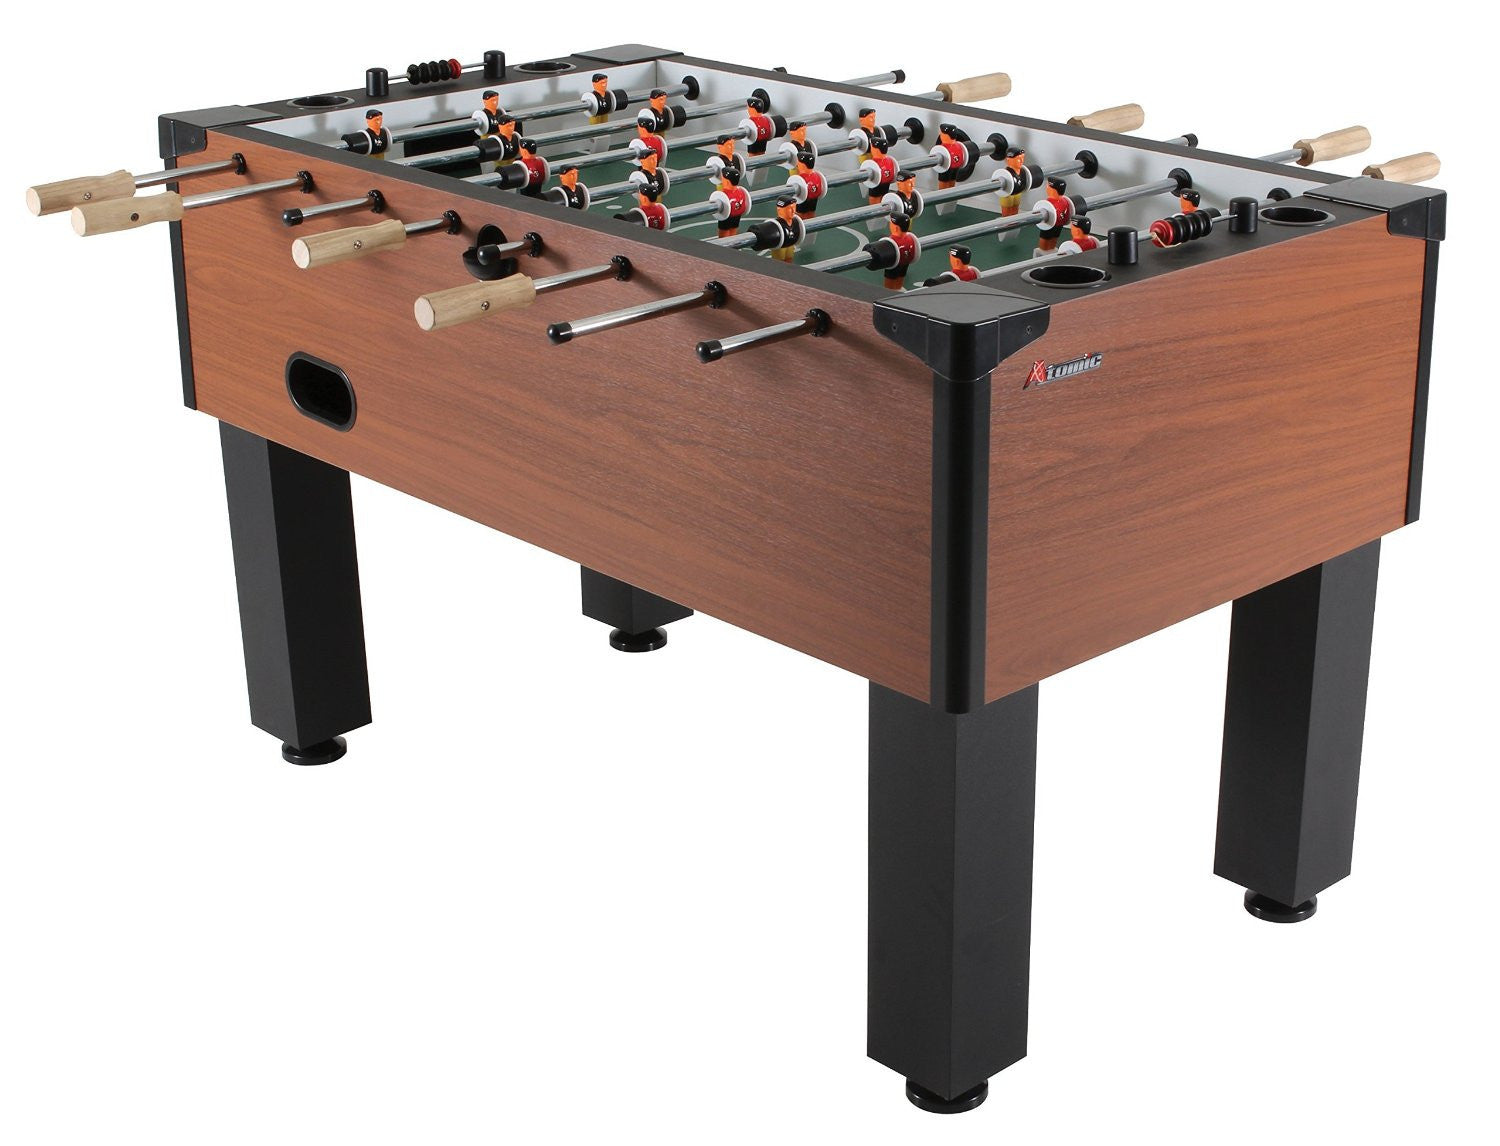  Atomic Gladiator Foosball Table by DMI Sports available at Foosball Planet.